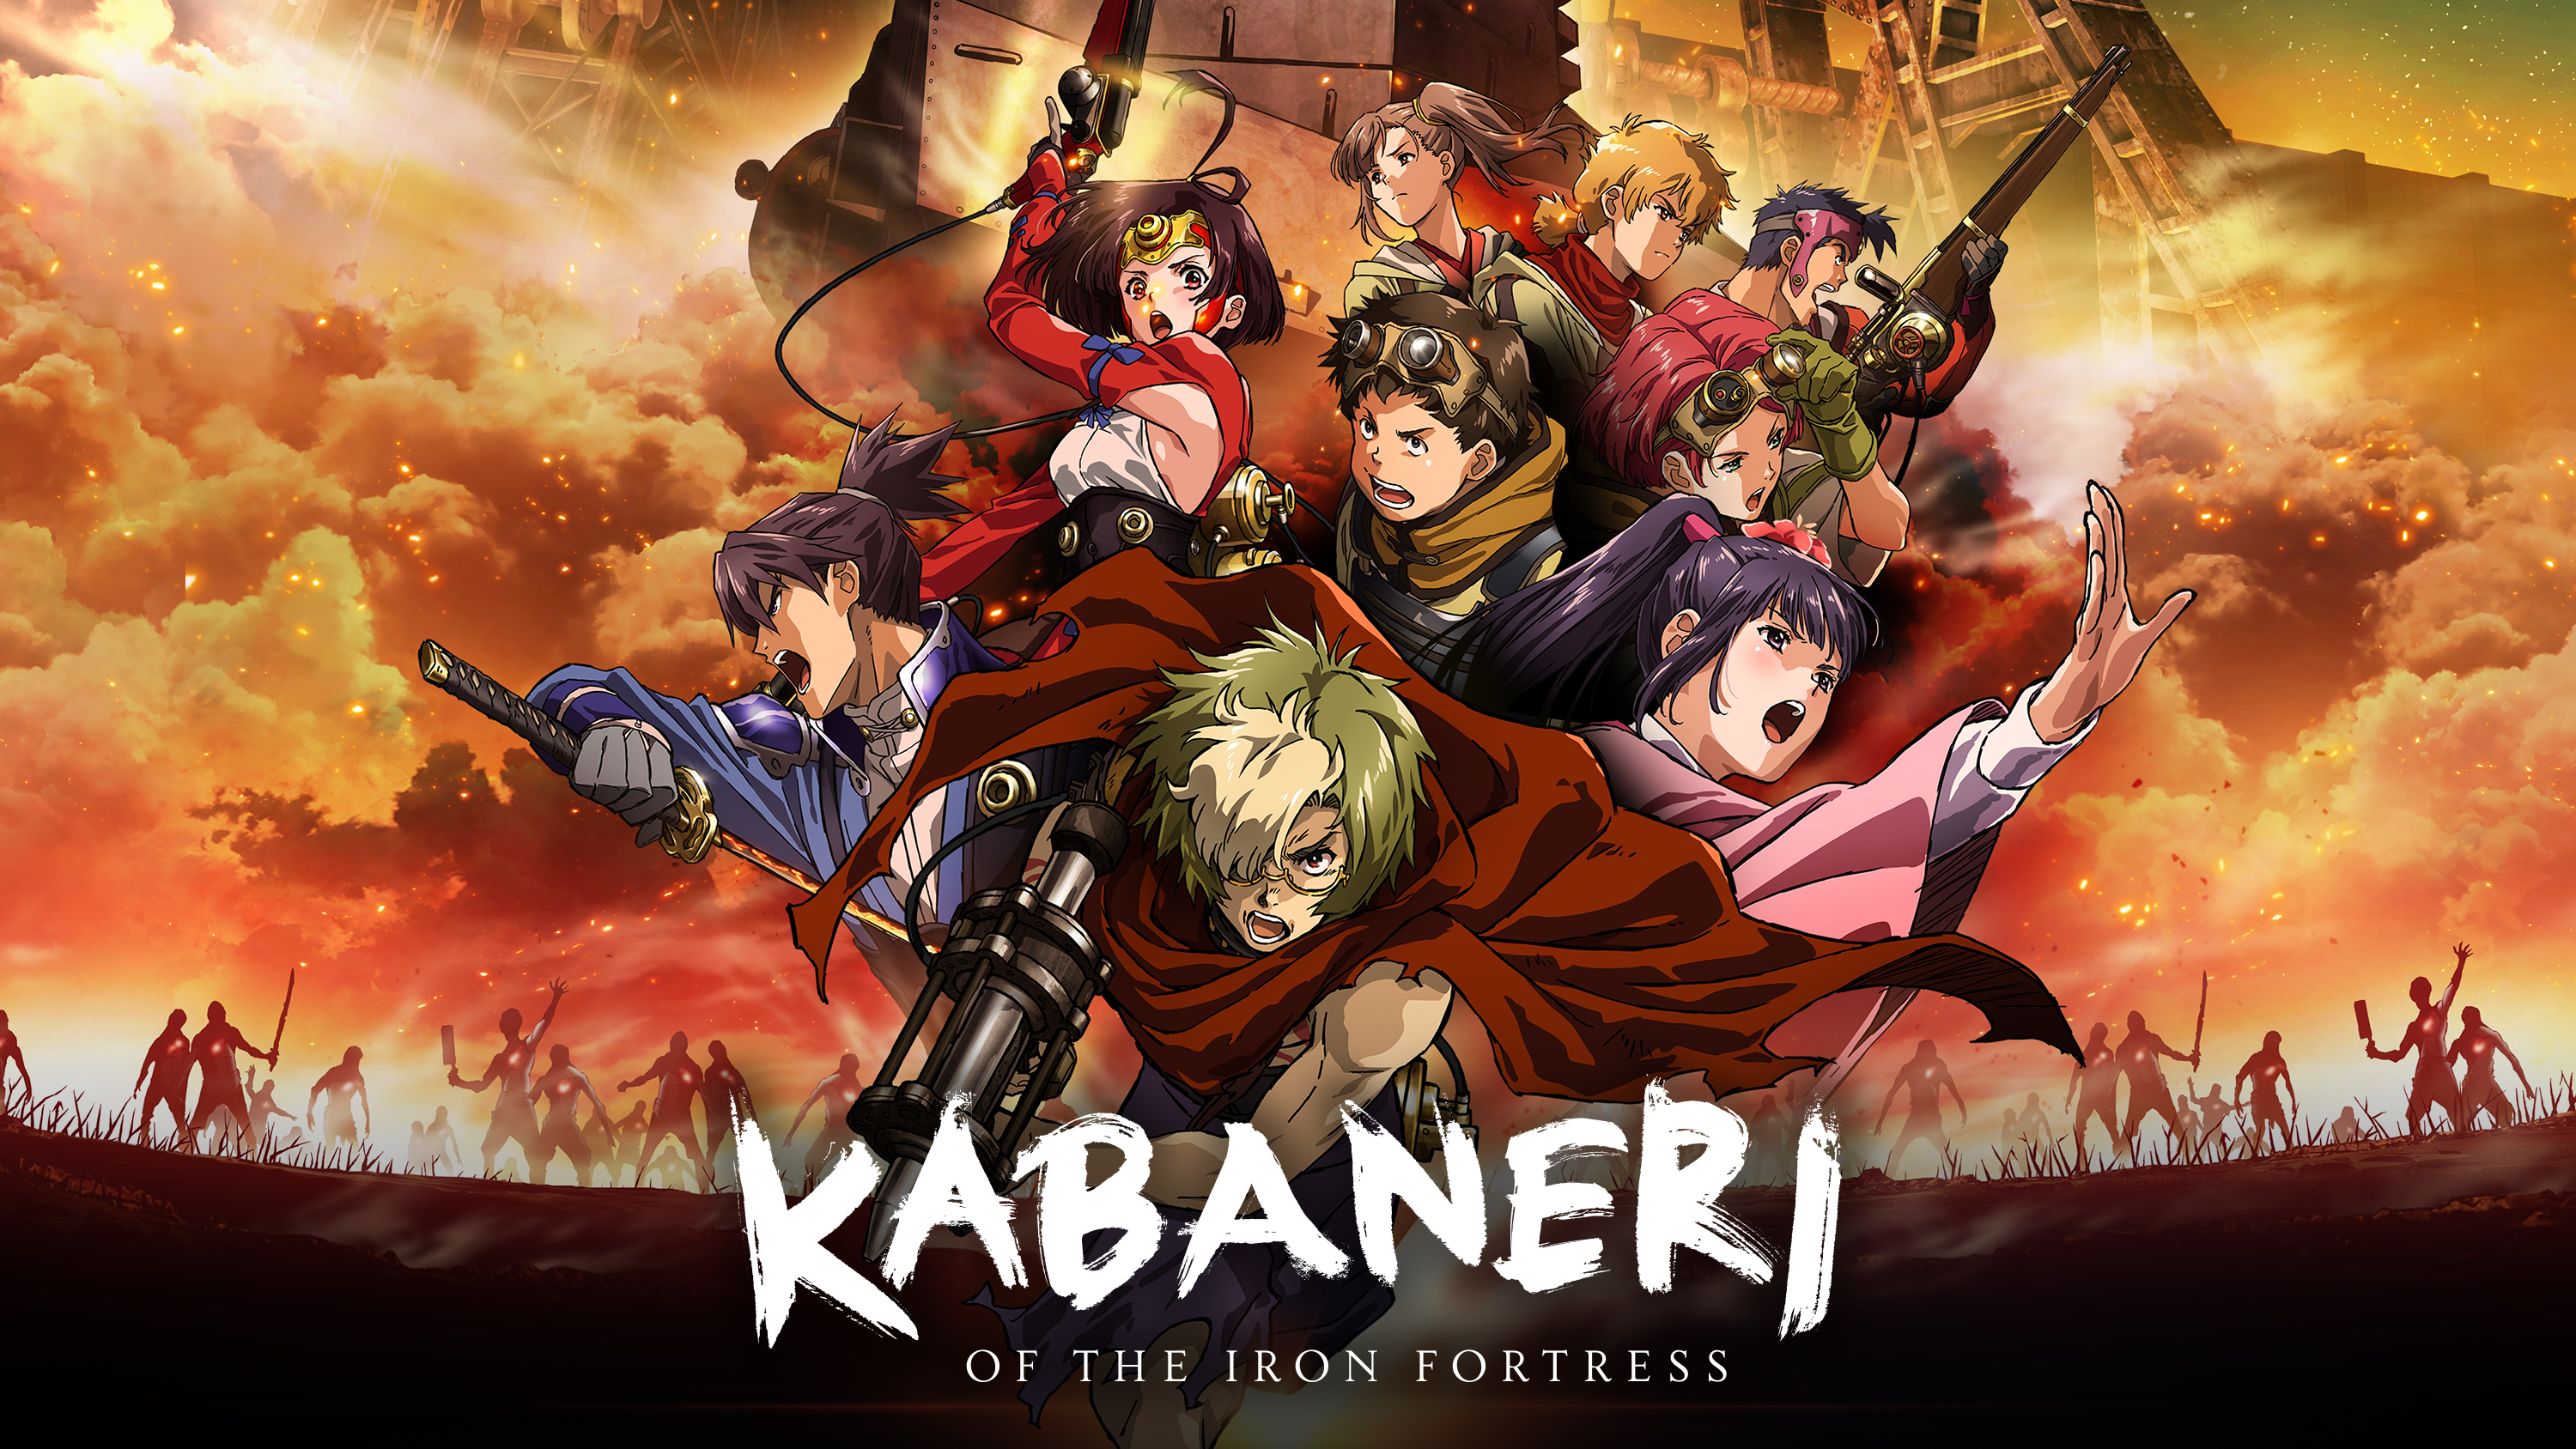 Prime Video: KABANERI OF THE IRON FORTRESS